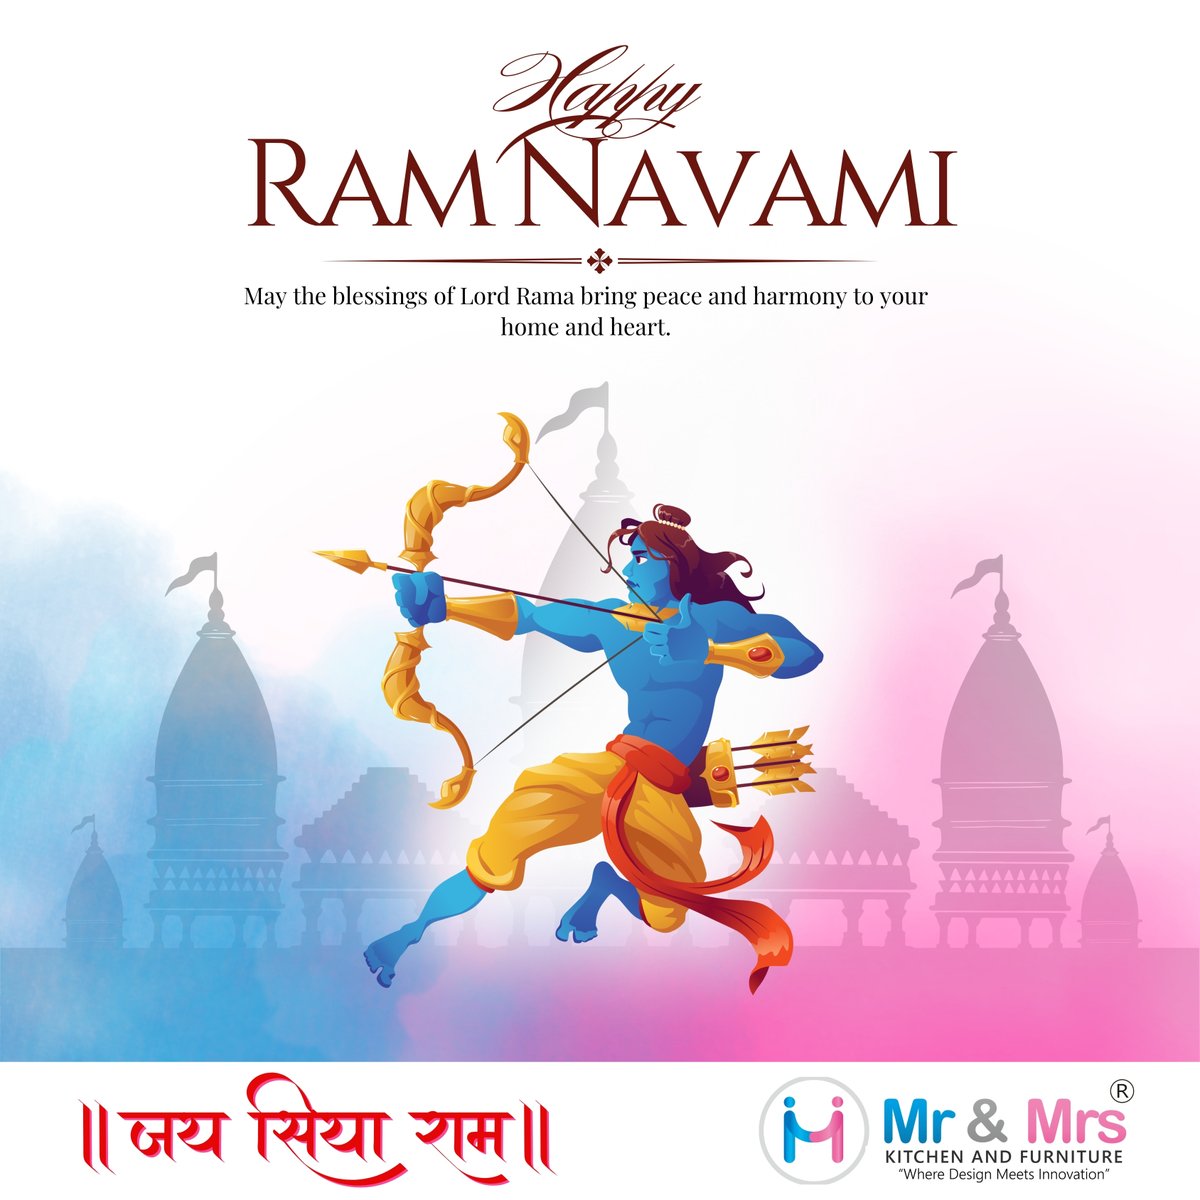 On this divine day of Ram Navami, may Lord Rama shower his choicest blessings on you and fill your life with happiness and prosperity.

#ramnavami #ramnavami2024 #ramnavamiindia #RamNavamiWishes #ramnavamispecial #ramnavamifestival #puneinterior  #mrandmrskitchenandfurniture